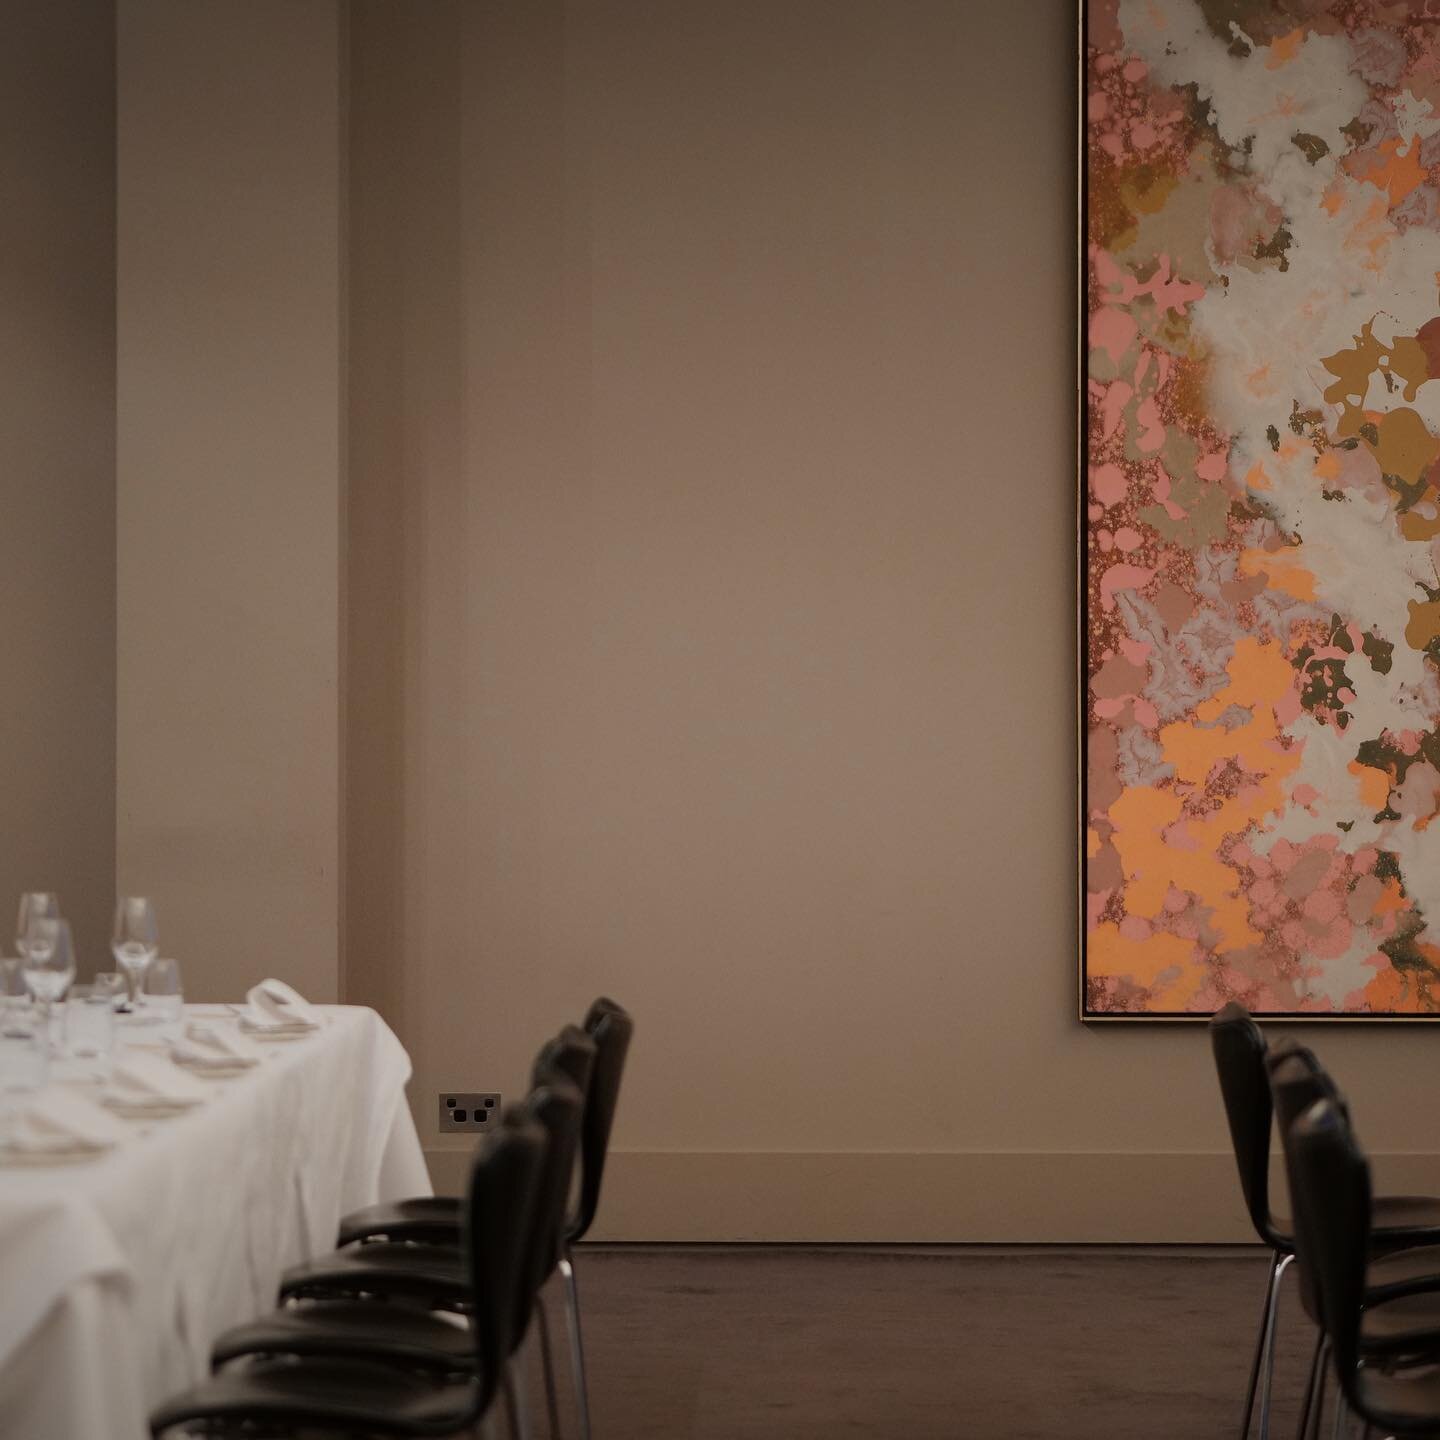 Book a memorable experience for your Christmas gathering as we approach our last Christmas and New Year at Kent Street. 

Private dining is Available. Contact our team @tetsuyasydney to create a special occasion.